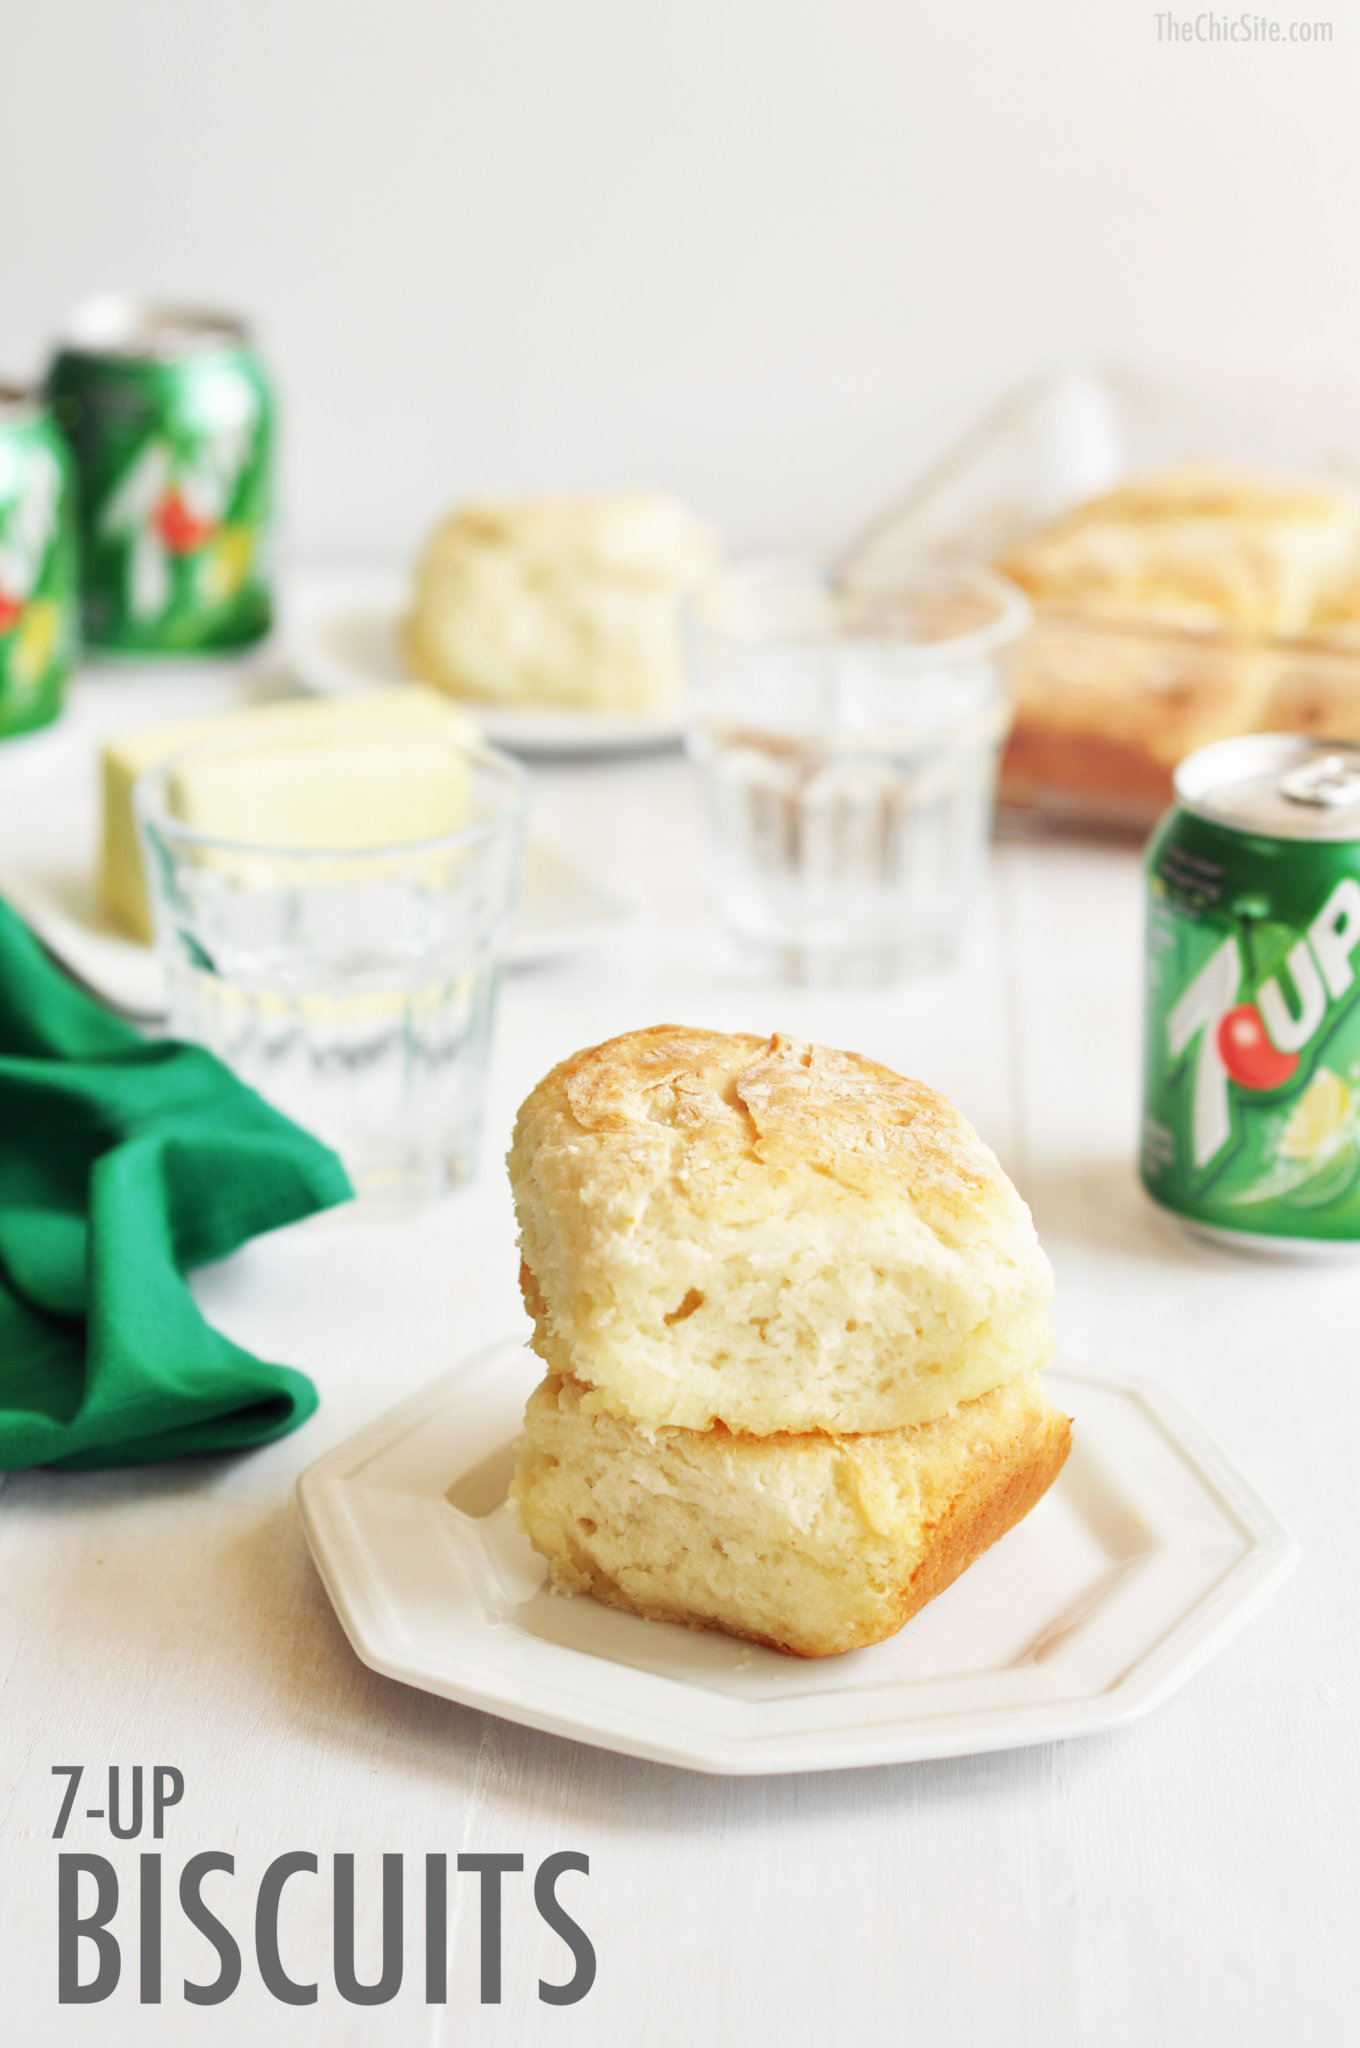 What is the recipe for the 7-Up biscuit?